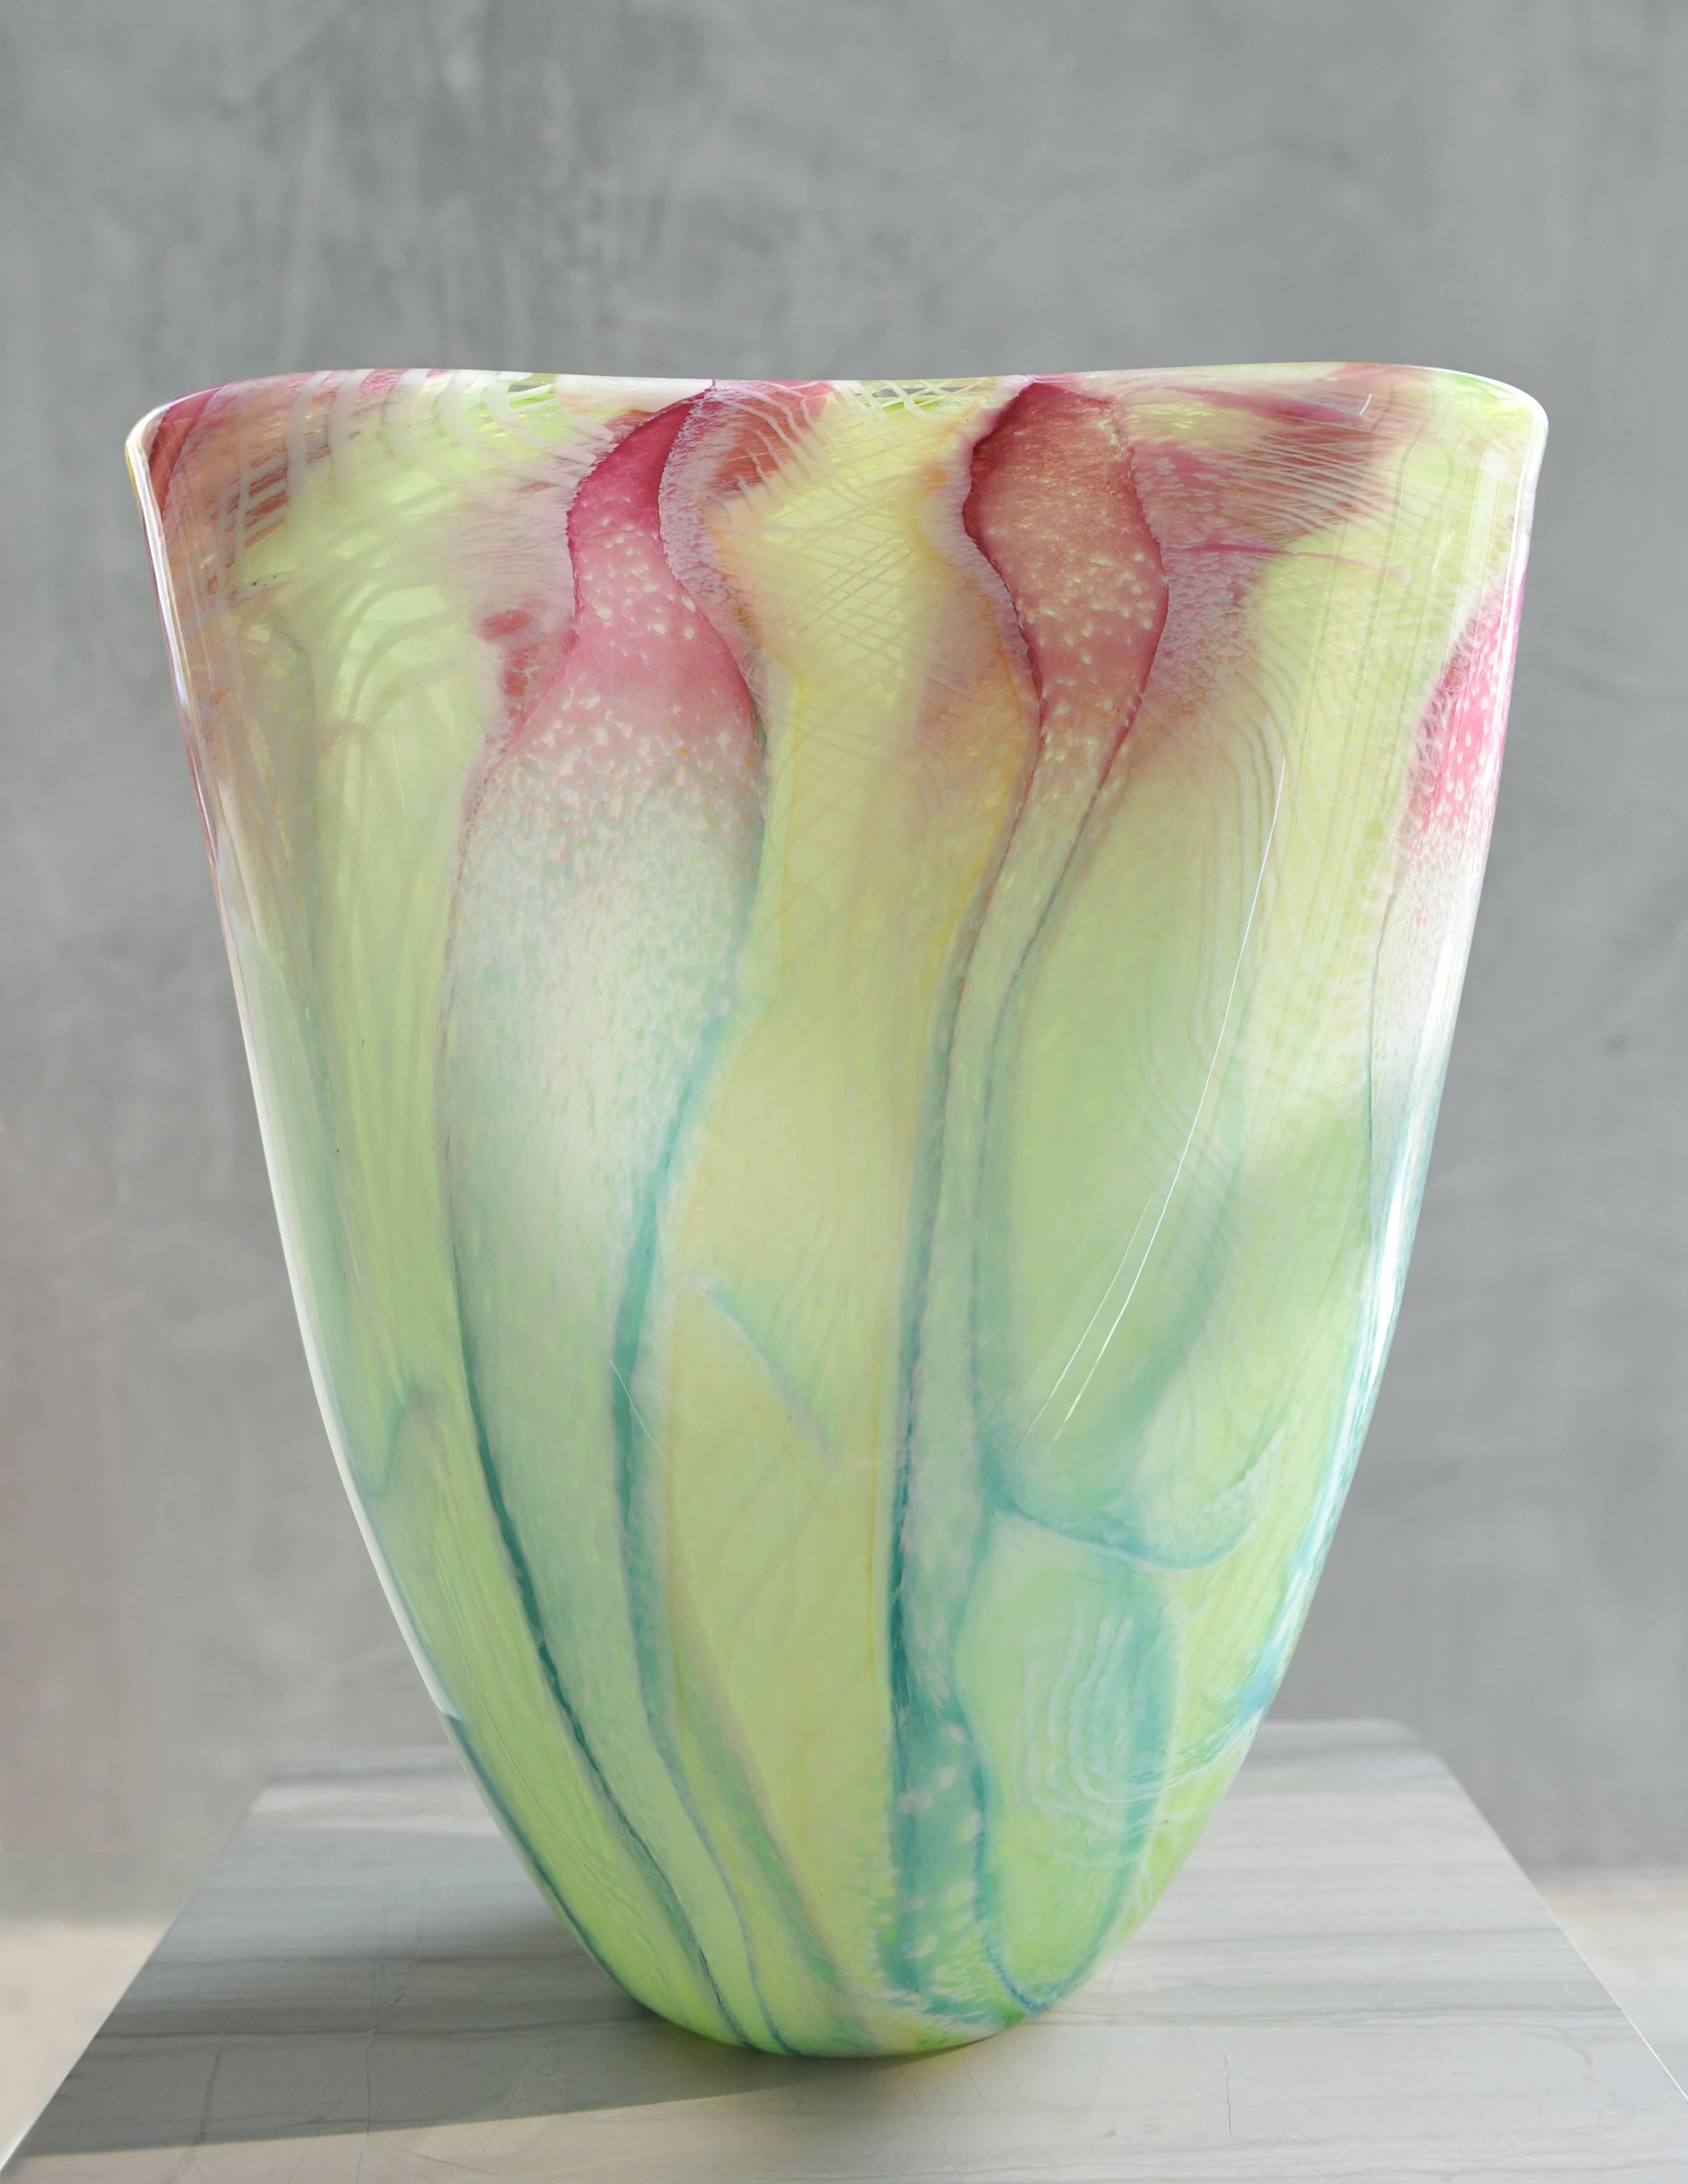 Richard Price Figurative Sculpture - Large fan shaped blown glass vase. Murano glass style colors yellow, green, red